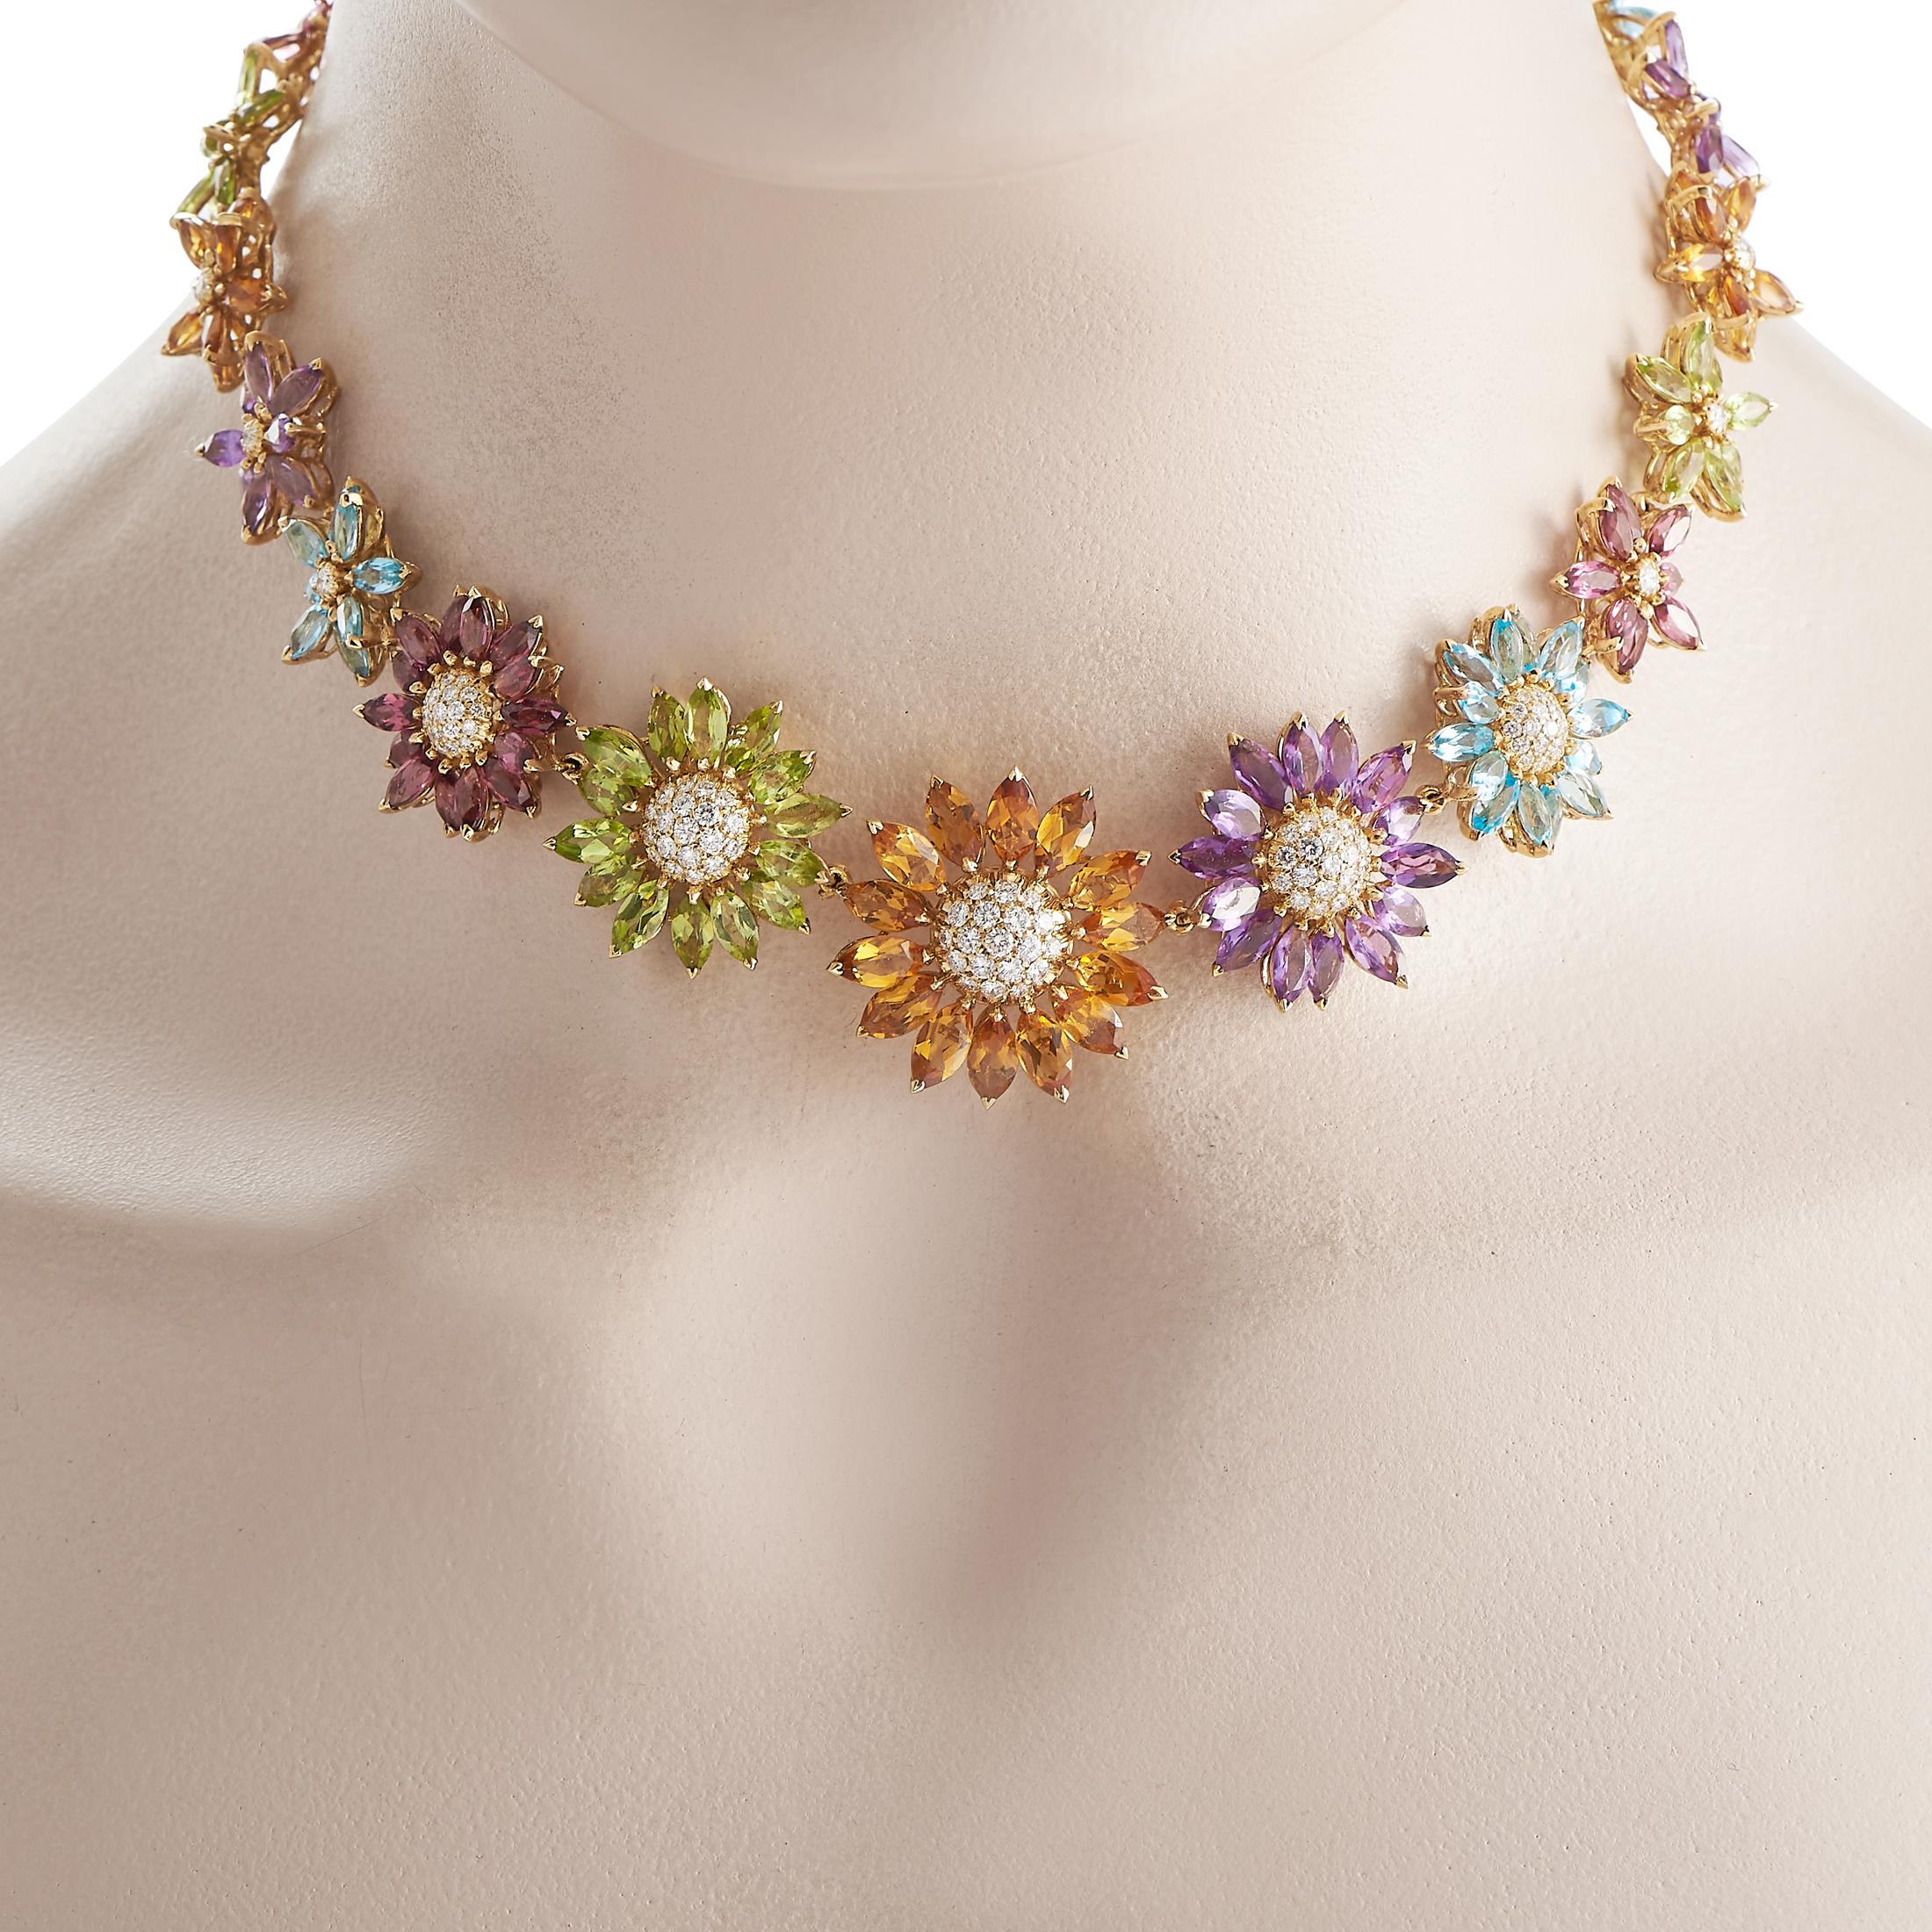 From British luxury brand Asprey, here is a multi-gem necklace beaming with playful color and feminine sophistication. The necklace's full strand is decorated with flowers, each designed with a diamond-encrusted center and colored gemstone petals.